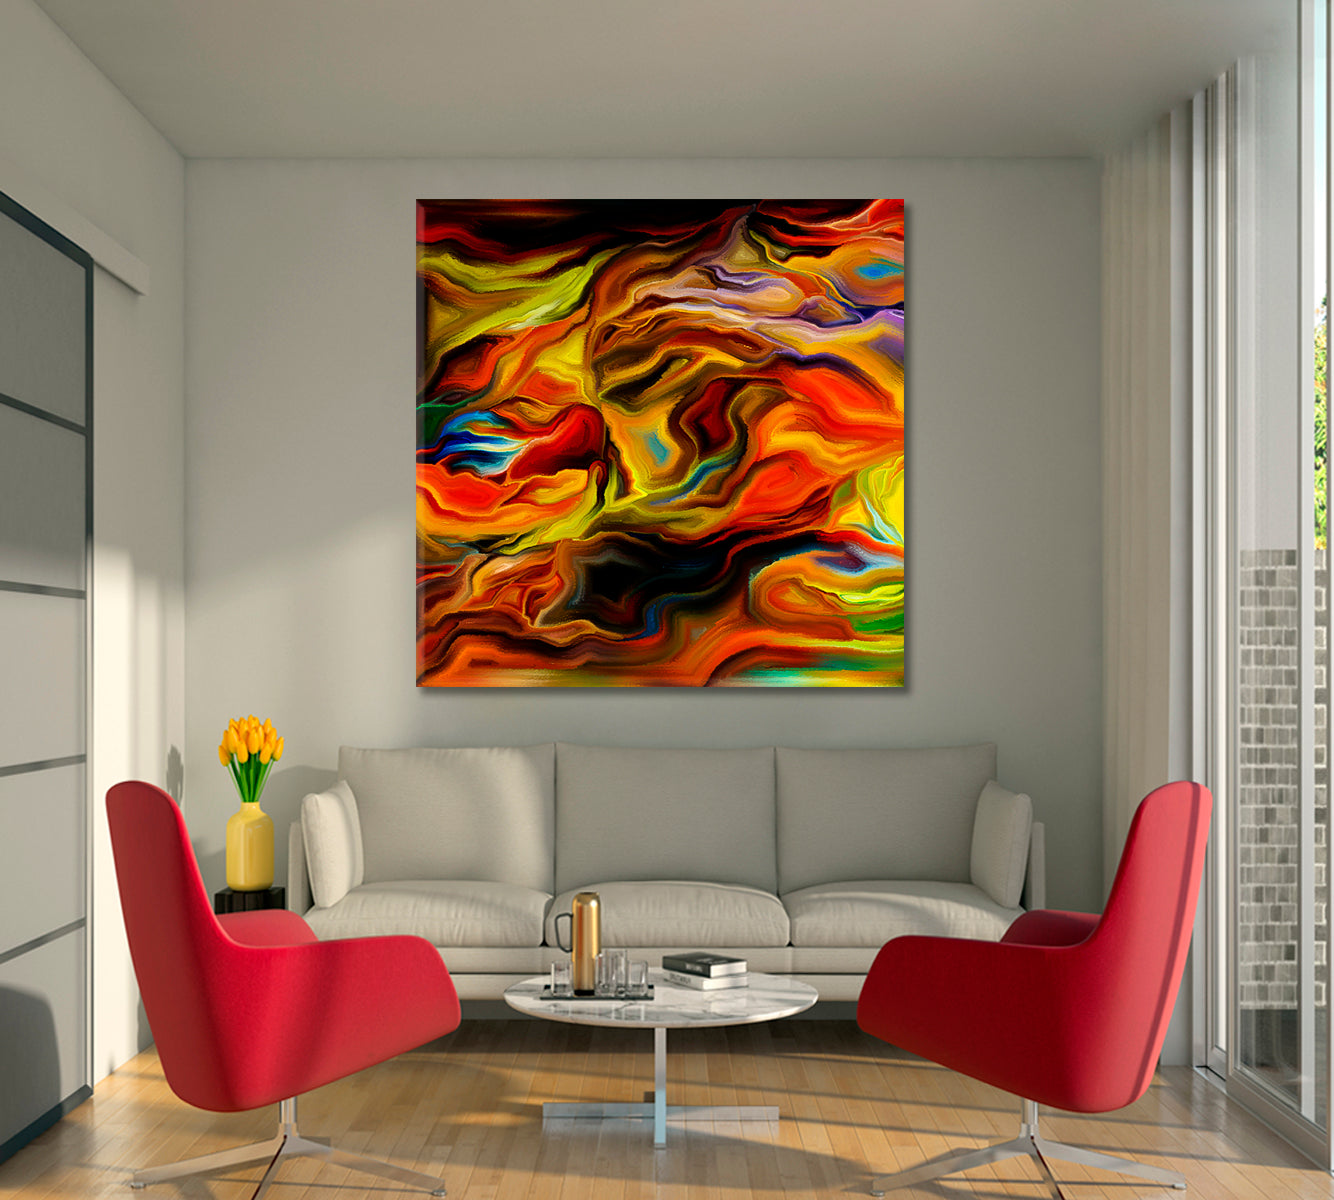 ABSTRACT ART BEAUTIFUL Interlacing of Colored Lines | Square Panel Abstract Art Print Artesty 1 Panel 12"x12" 